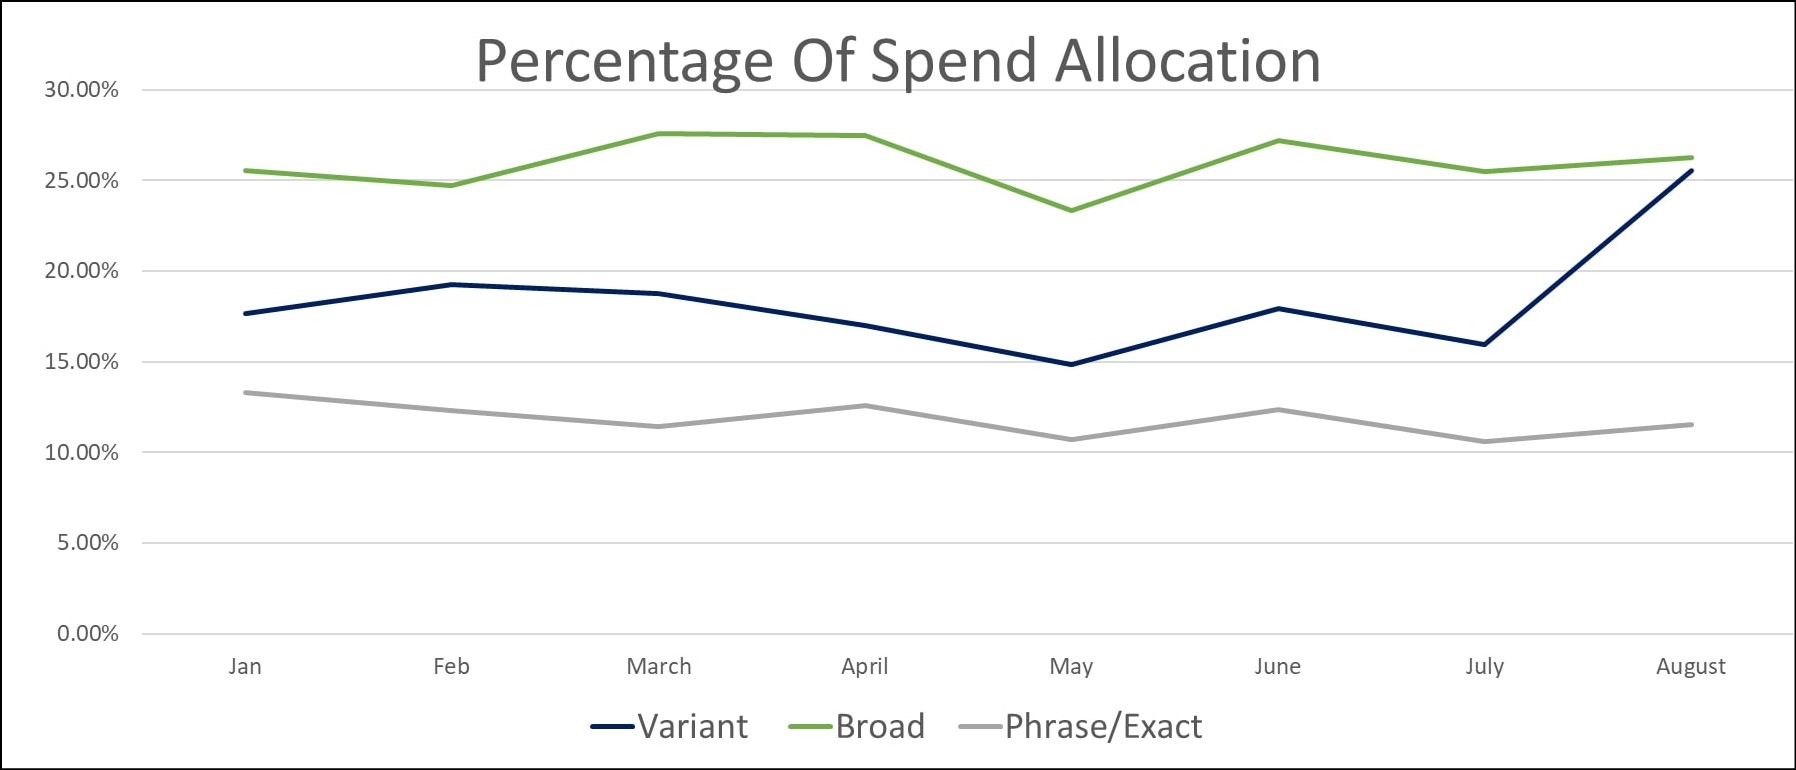 State of PPC - Image 1 - Percentage of spend allocation